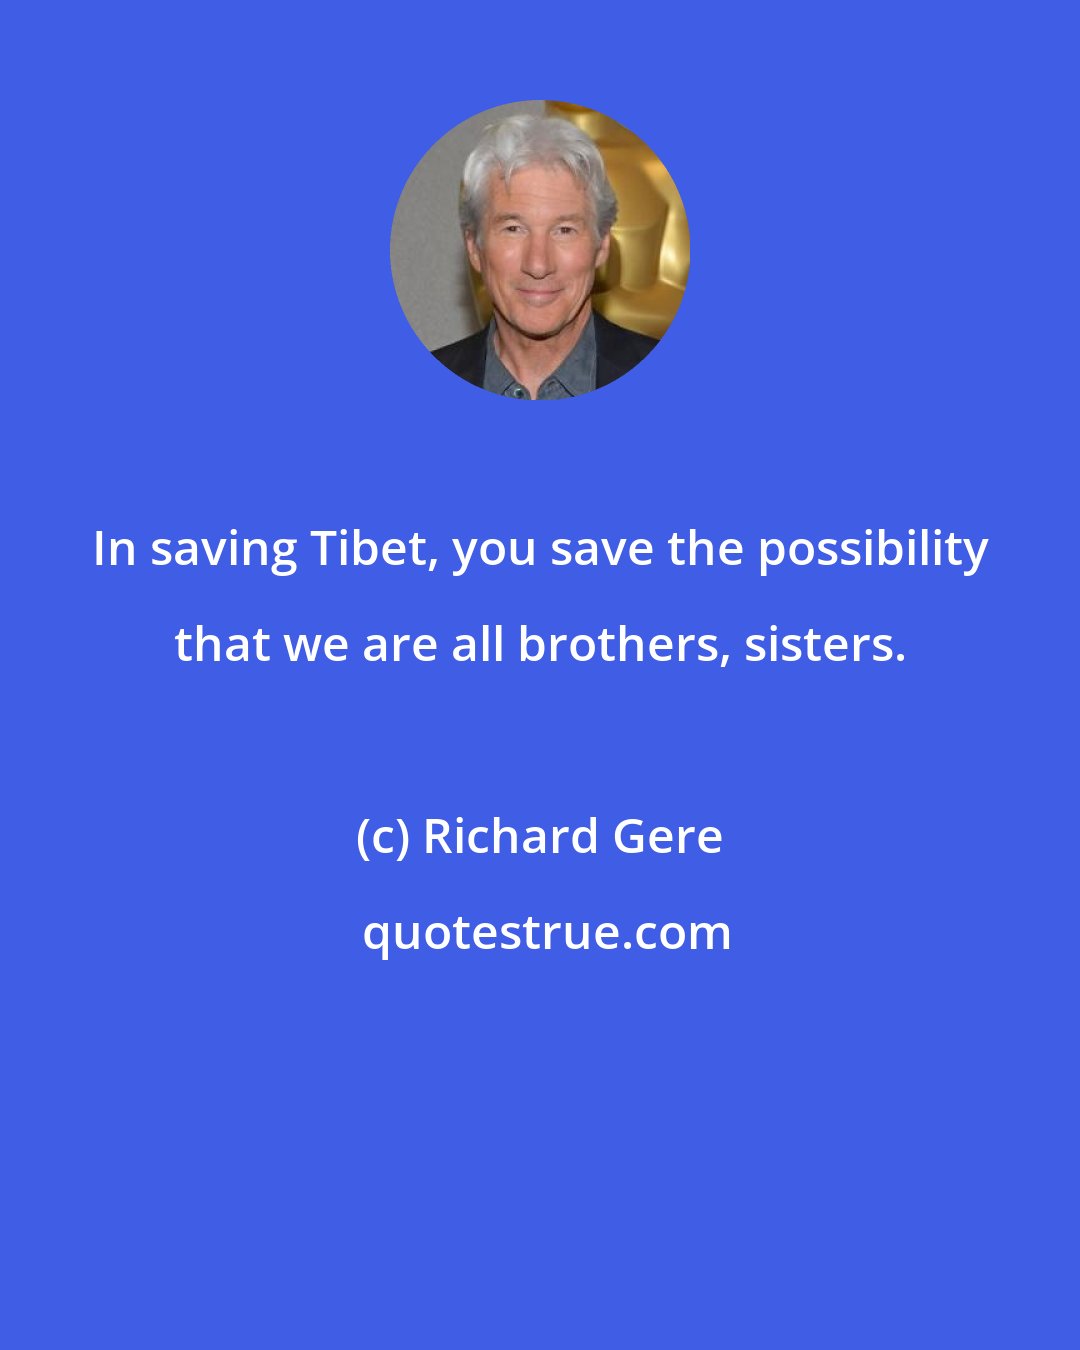 Richard Gere: In saving Tibet, you save the possibility that we are all brothers, sisters.